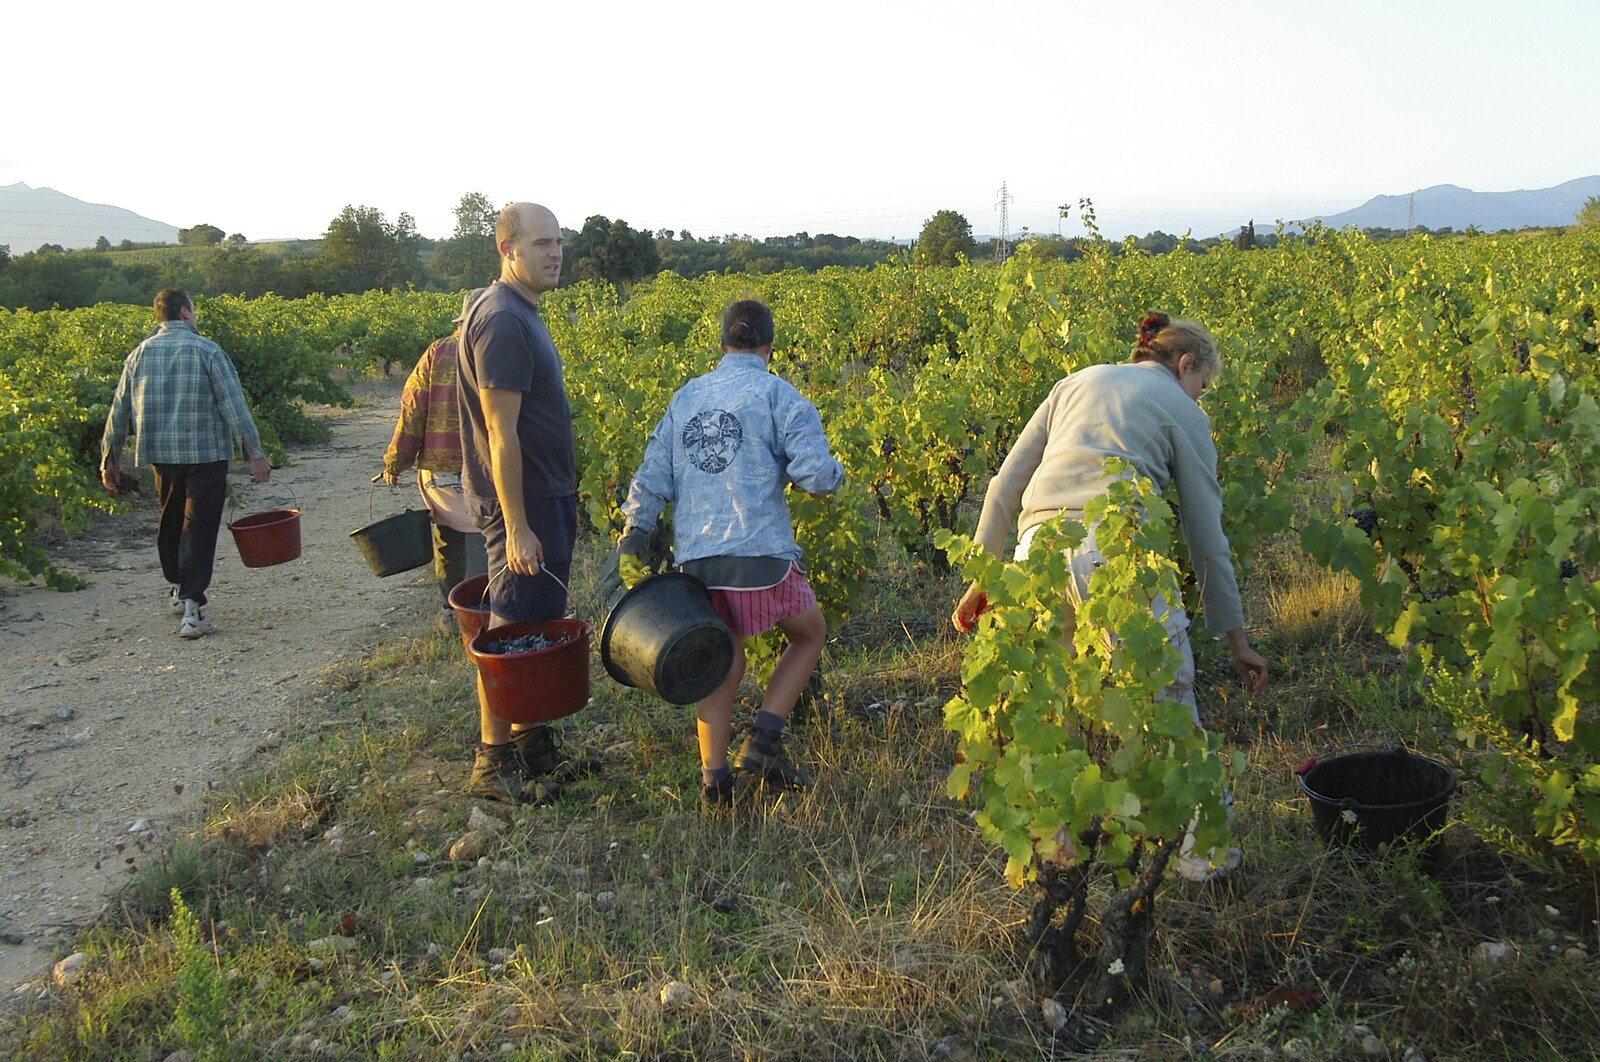 The grape pickers get to work from Grape Picking and Pressing, Roussillon, France - 19th September 2006